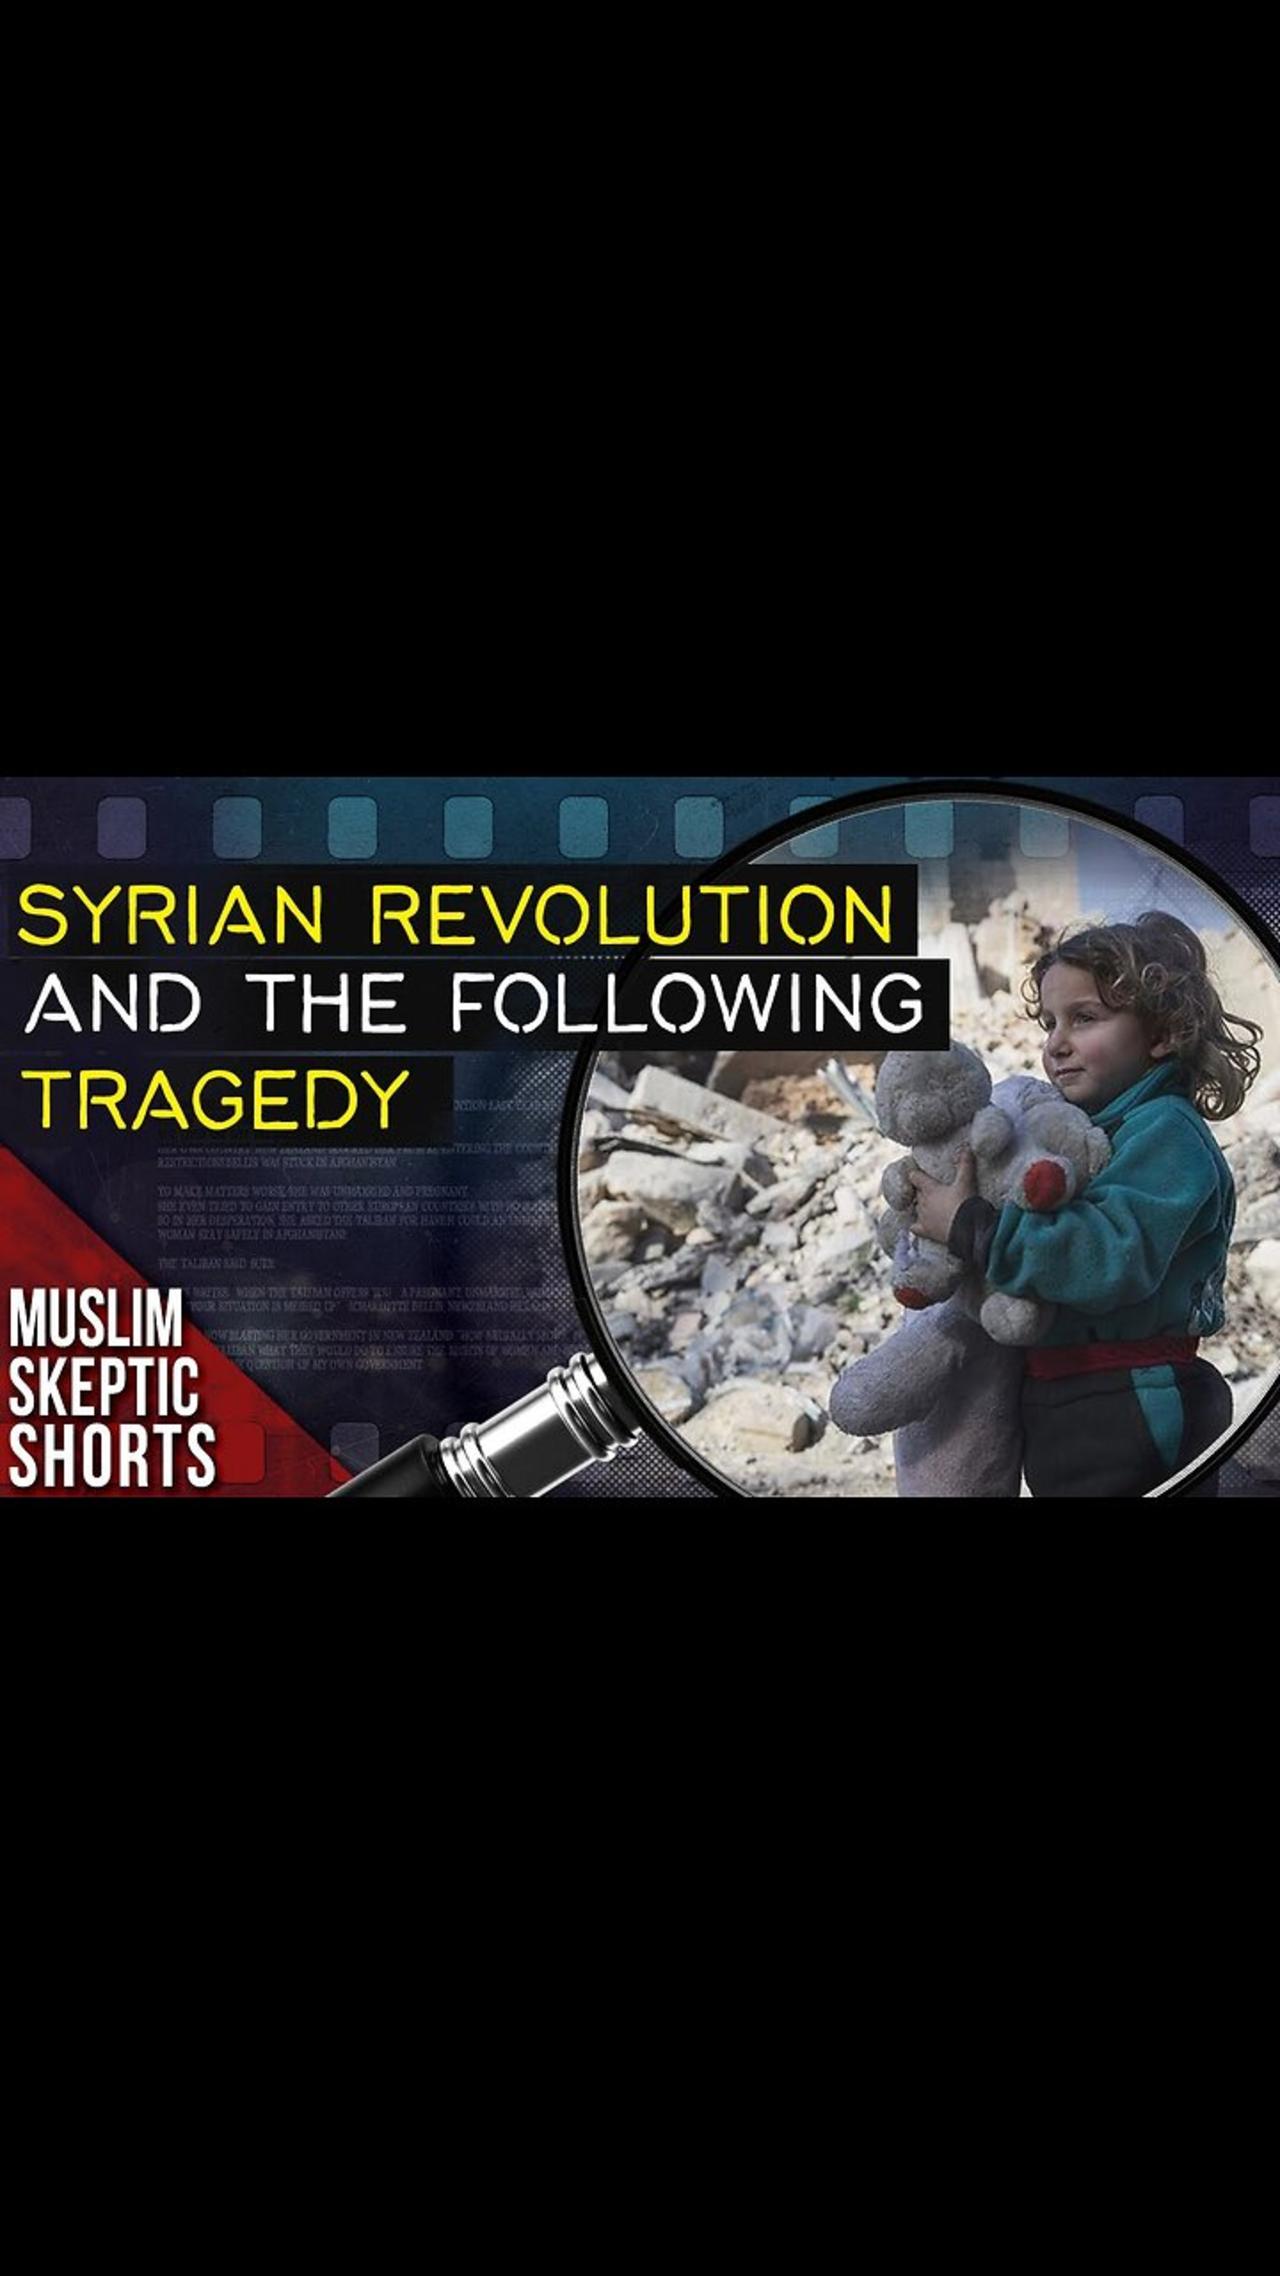 11th Anniversary of Syrian Revolution: A Brief Look